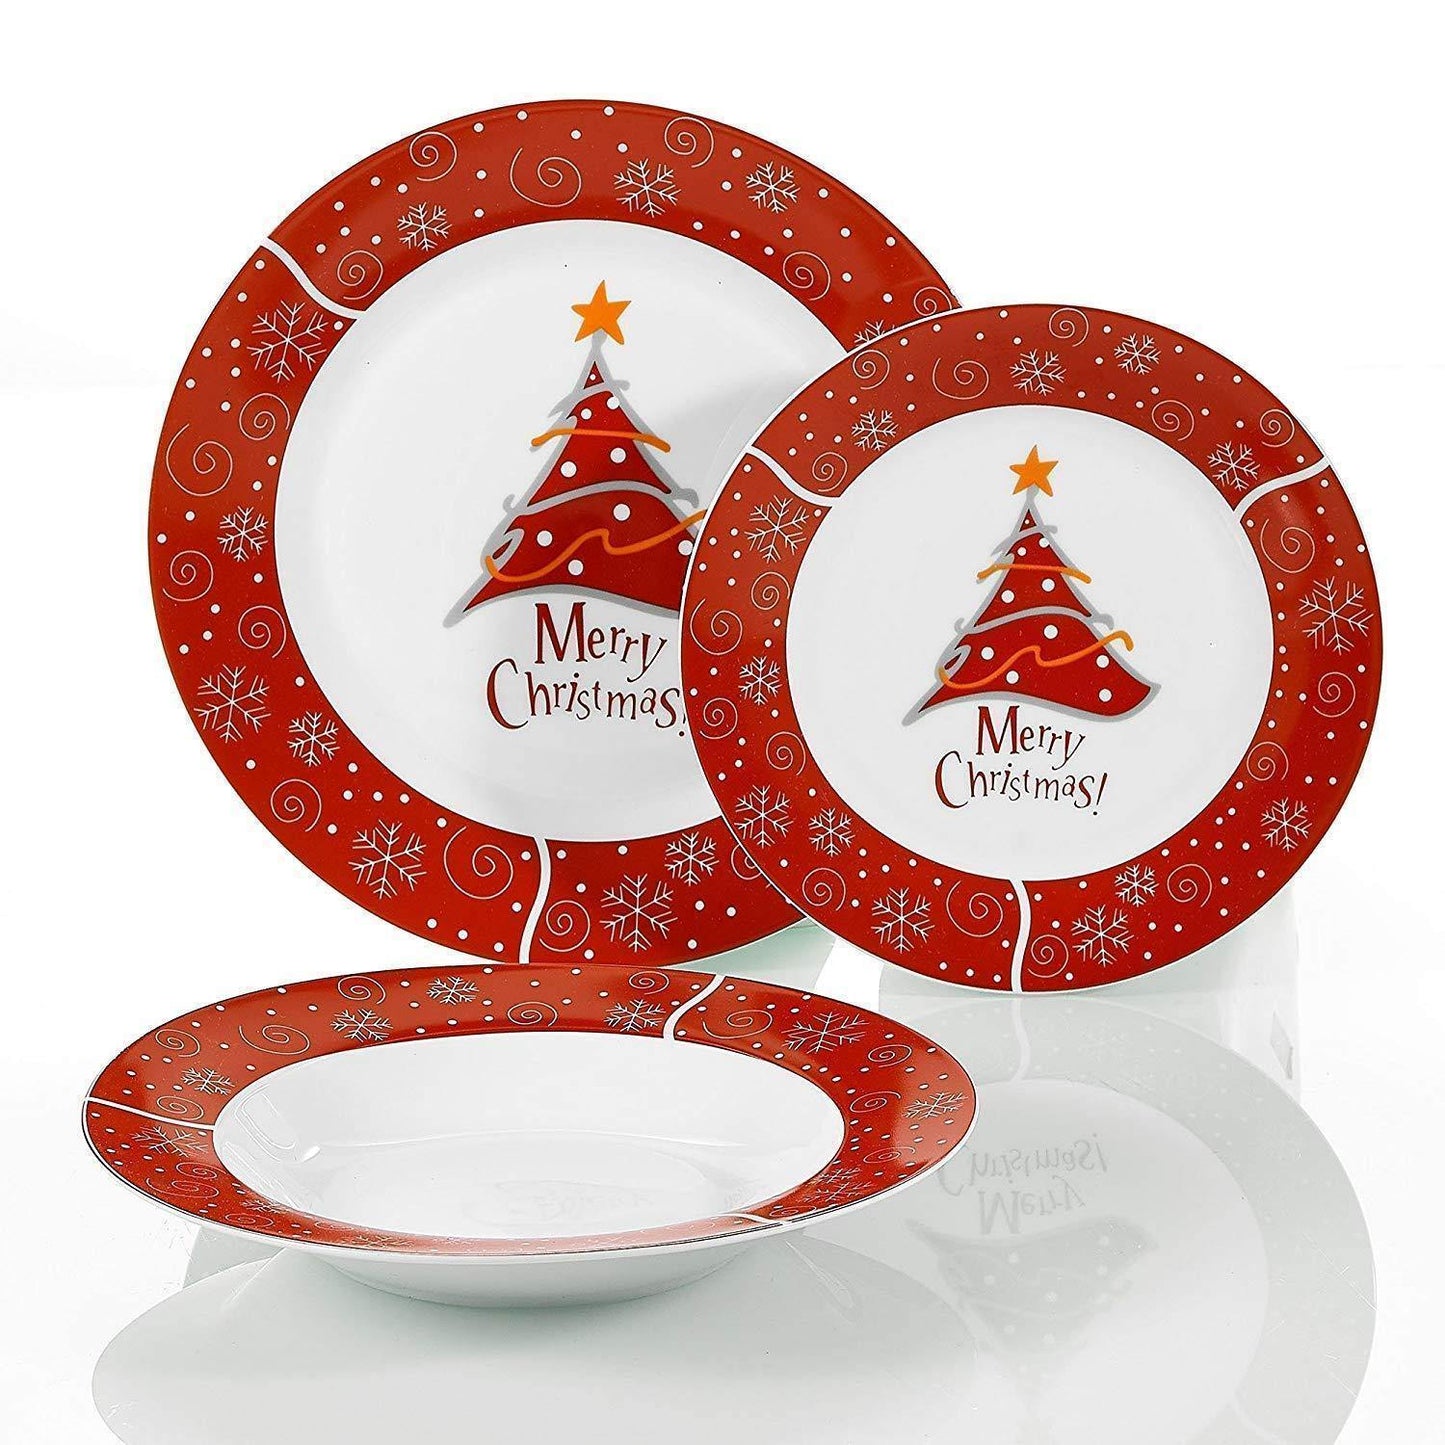 18-Piece Christmas Style Porcelain Ceramic Dinnerware Set Tableware with 6*Dessert Plate,Soup Plate and Dinner Plate Set - Nordic Side - 18, and, Ceramic, Christmas, Dessert, Dinner, Dinnerwa